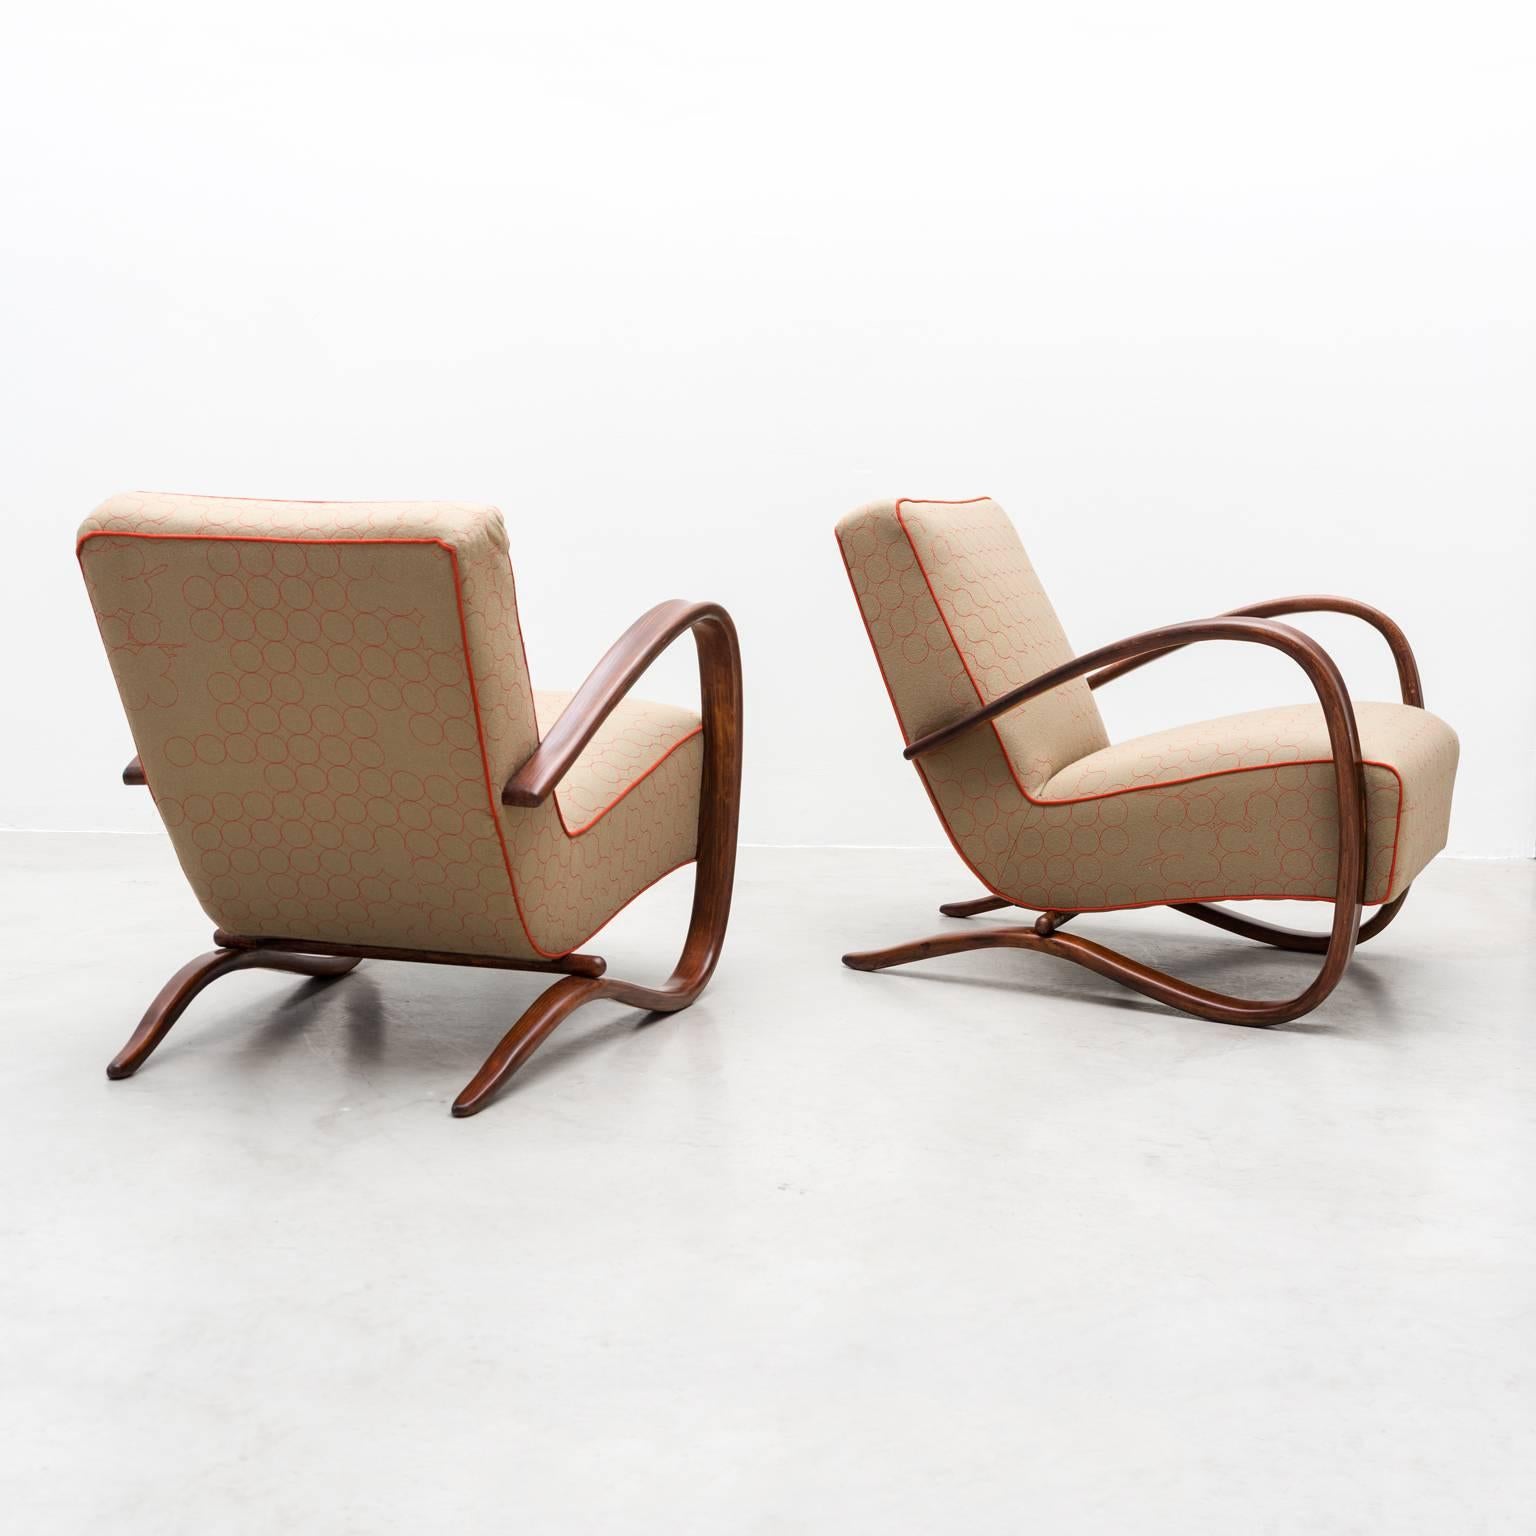 A stunning pair of model H269 chairs by Jindrich Halabala. These chairs retain their original patina on the beech arms, which has been enhanced by a French polish technique. They have been stripped to their seagrass and springs and reupholstered in